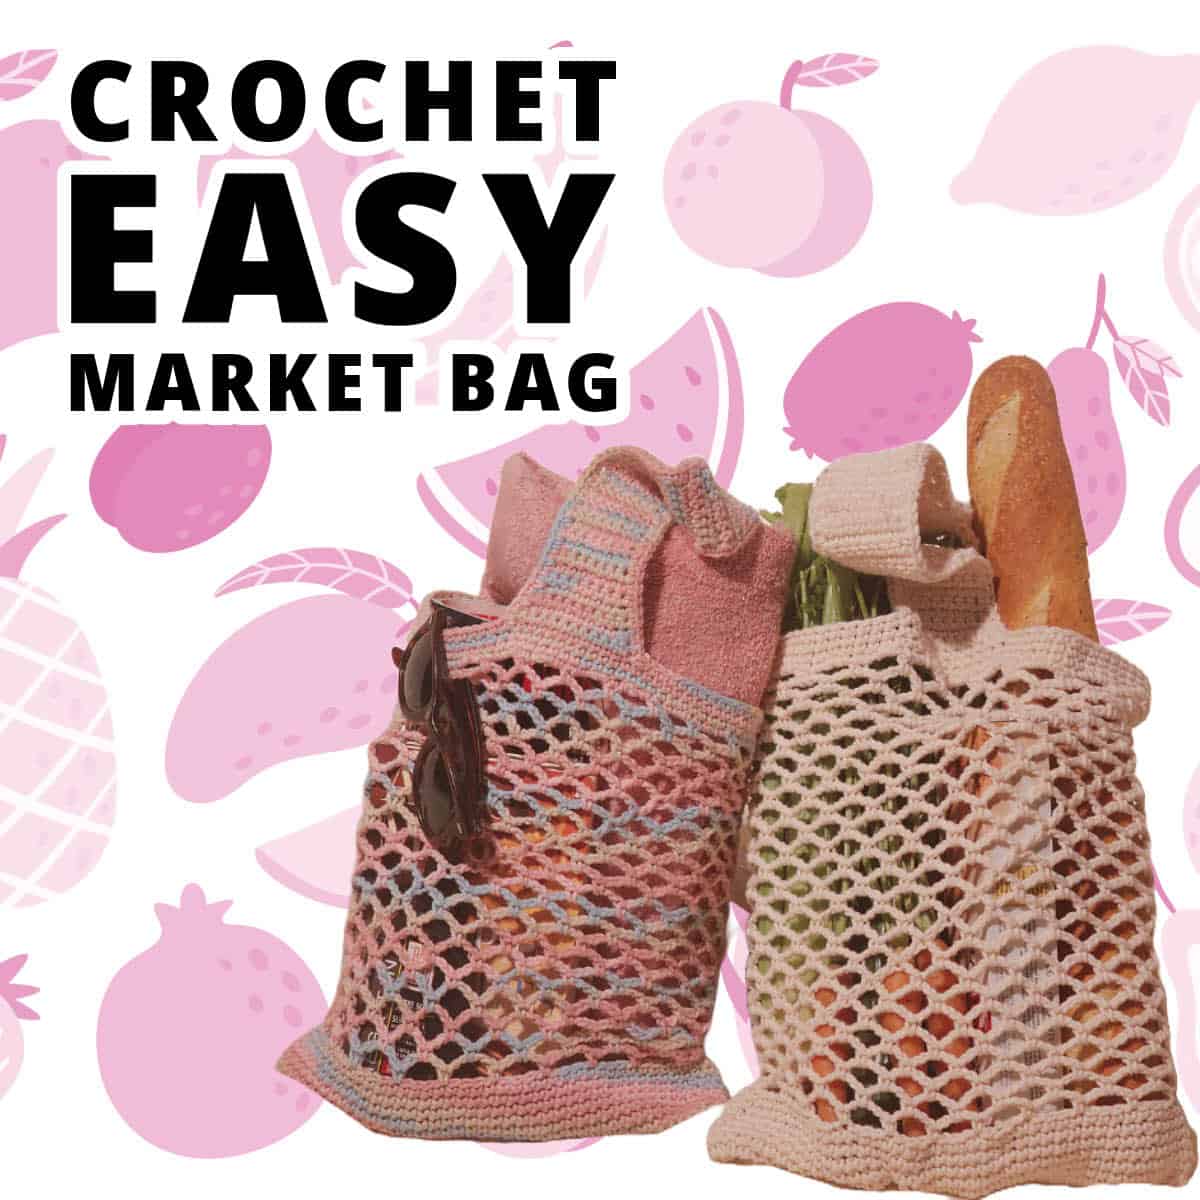 Fast and Easy Crochet Market Tote Bag Pattern